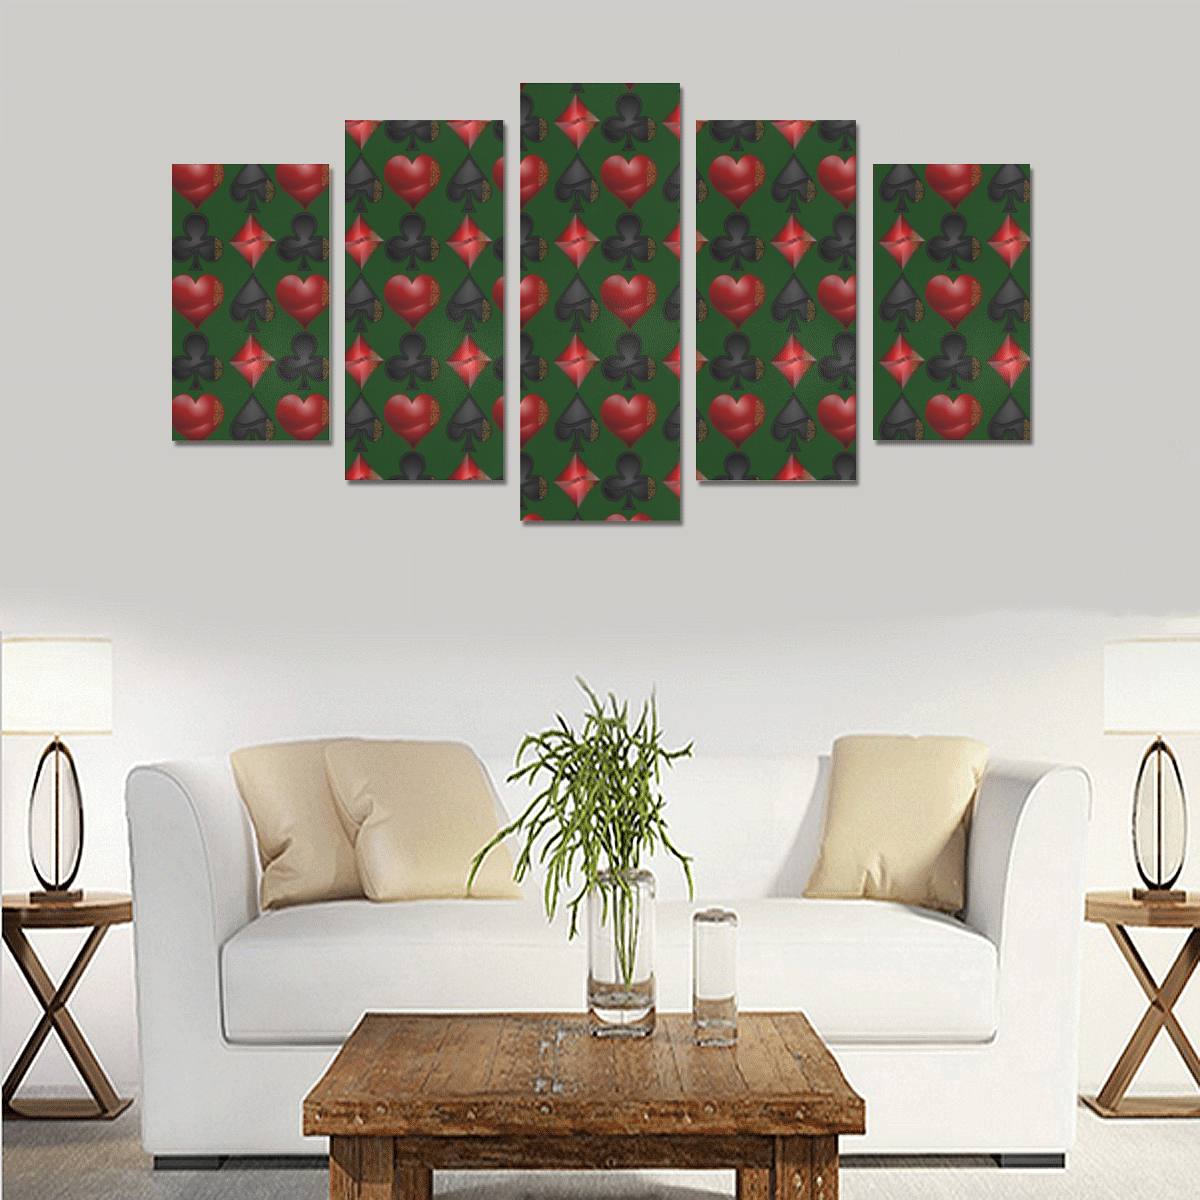 Las Vegas Black and Red Casino Poker Card Shapes on Green Canvas Print Sets A (No Frame)